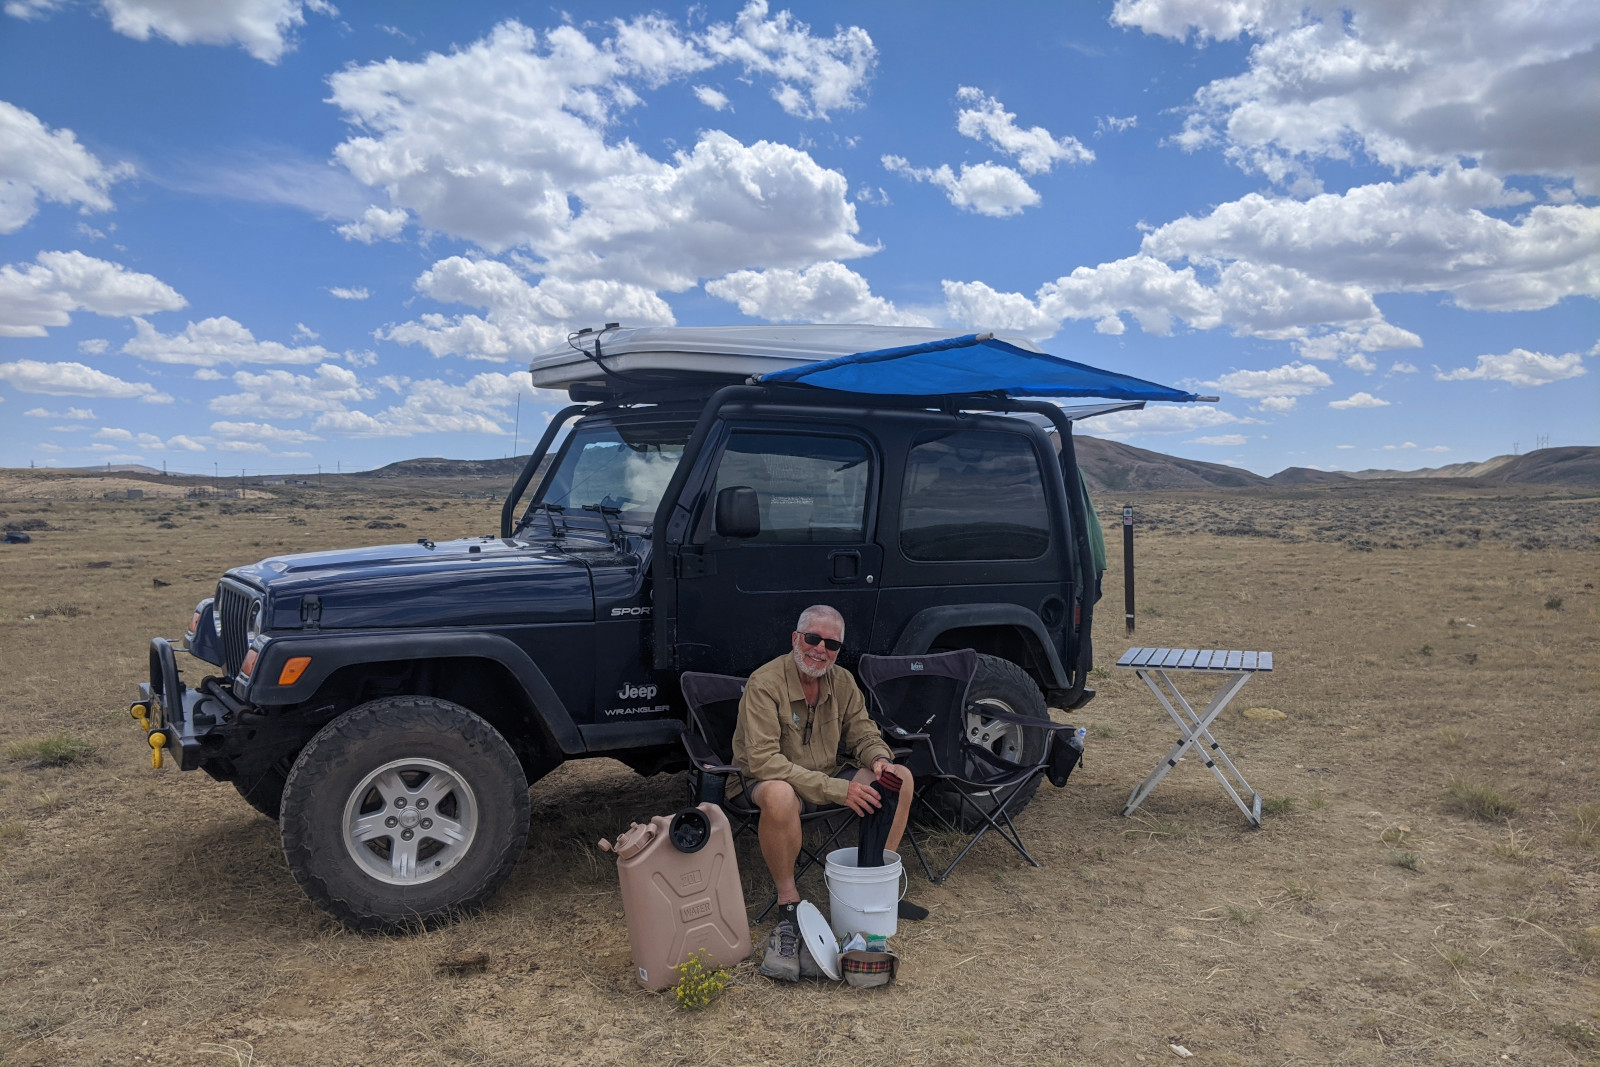 CDT Meetup 3: Dad doing hid laundry in a 2-gallon bucket